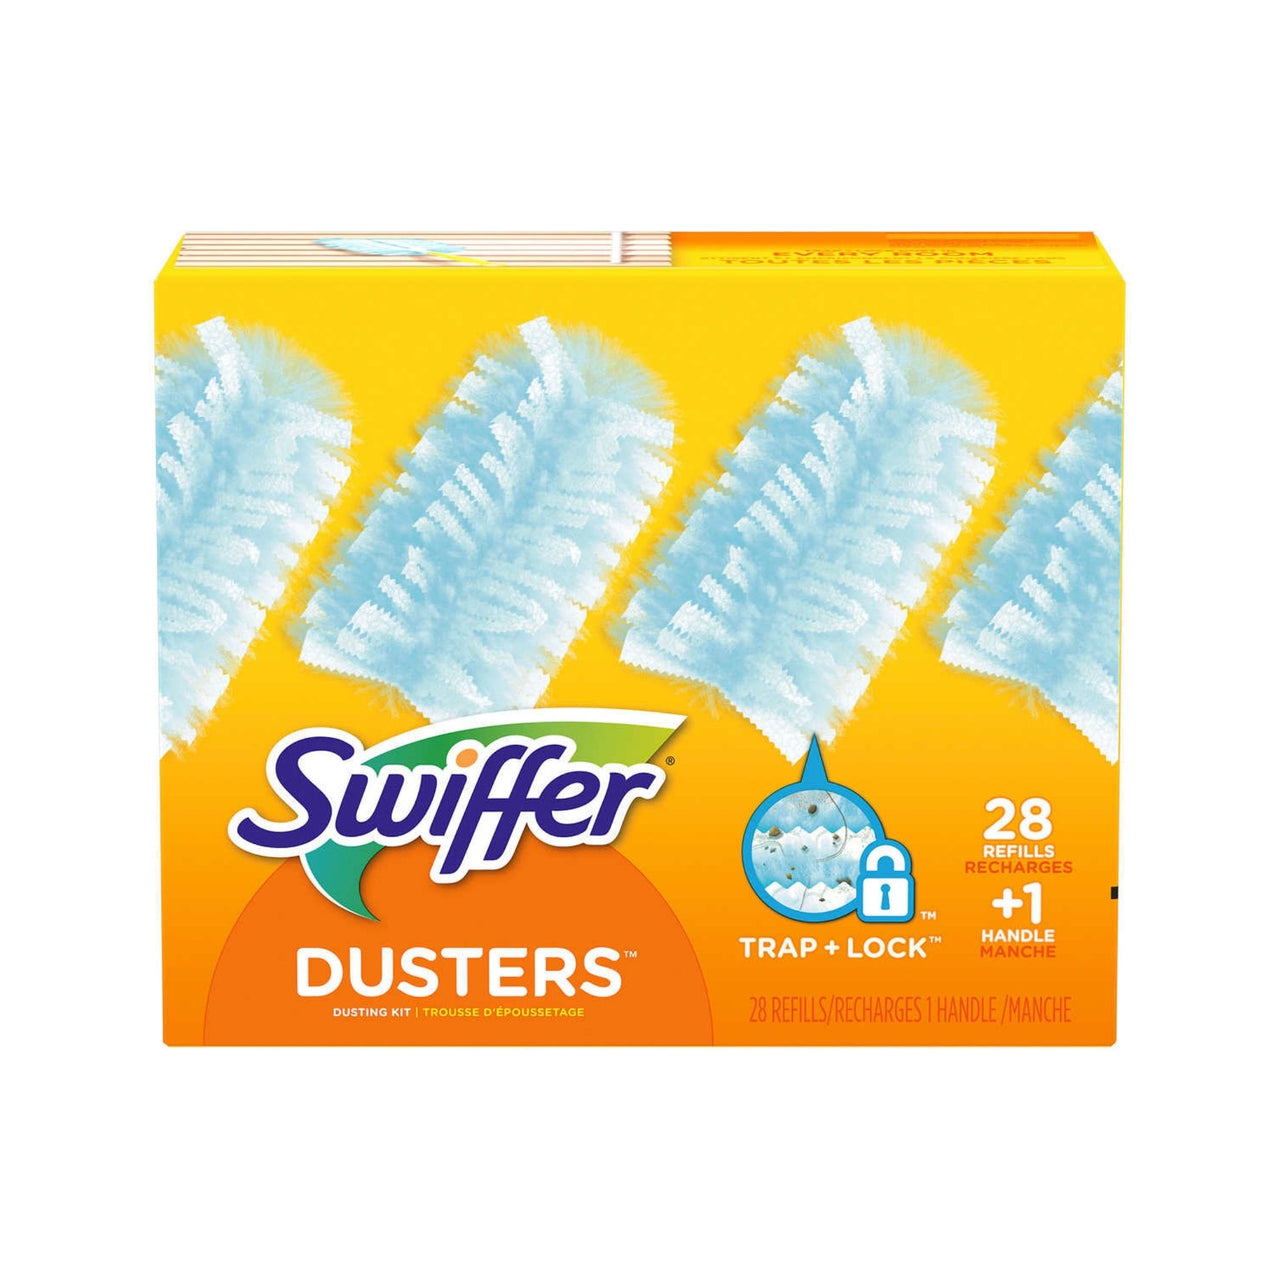 Image of Swiffer Dusters Dusting Kit With 28 Refills - 1 x 550 Grams